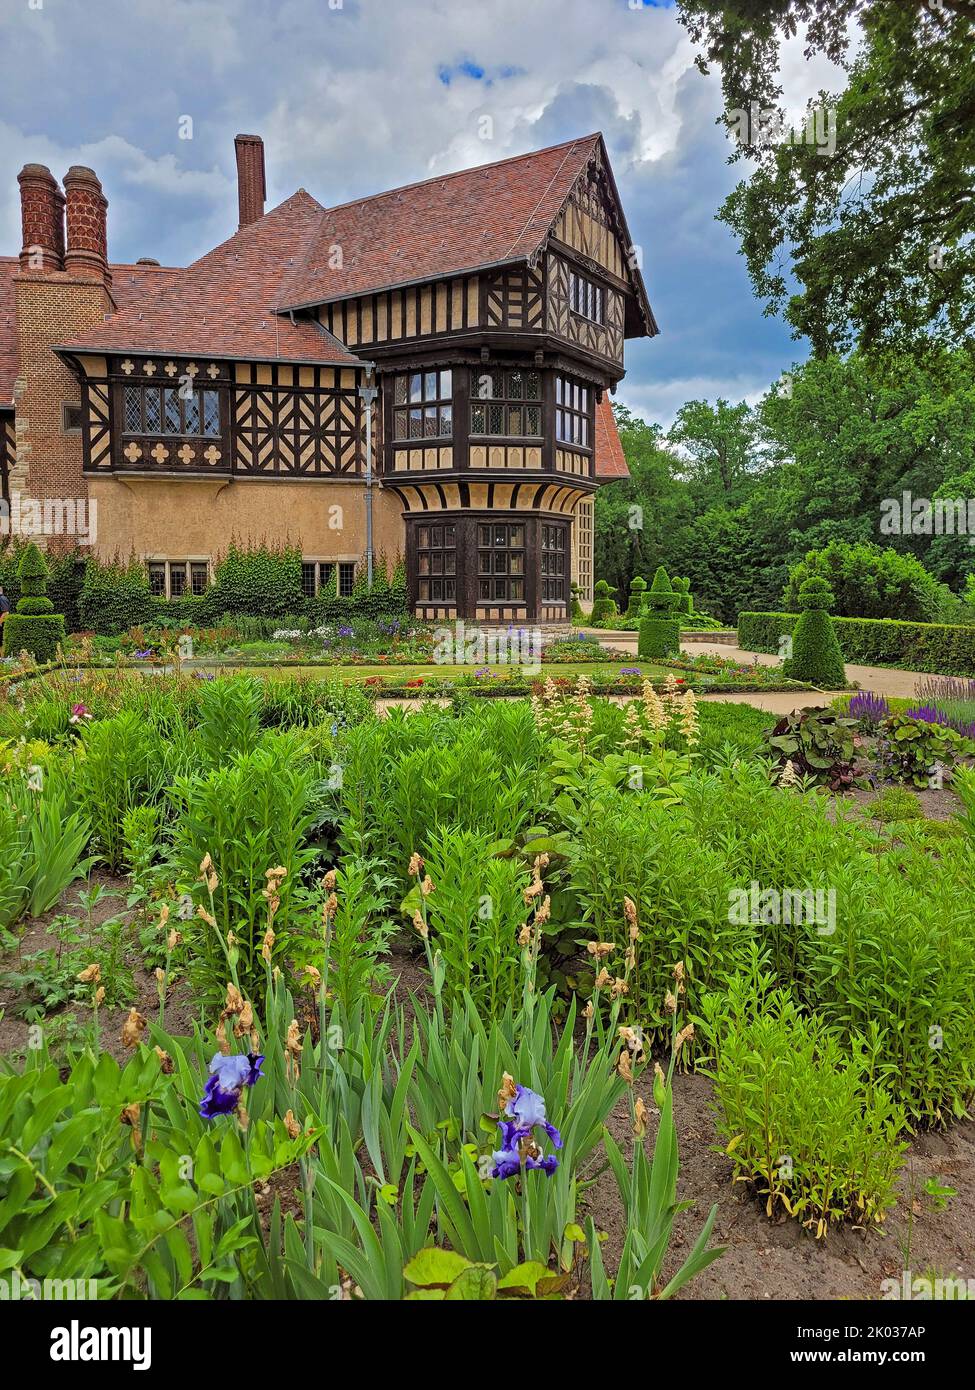 Cecilienhof Palace in the New Garden Landscape Park in English country house style, seat of the Potsdam Conference, Potsdam, Brandenburg, Germany Stock Photo